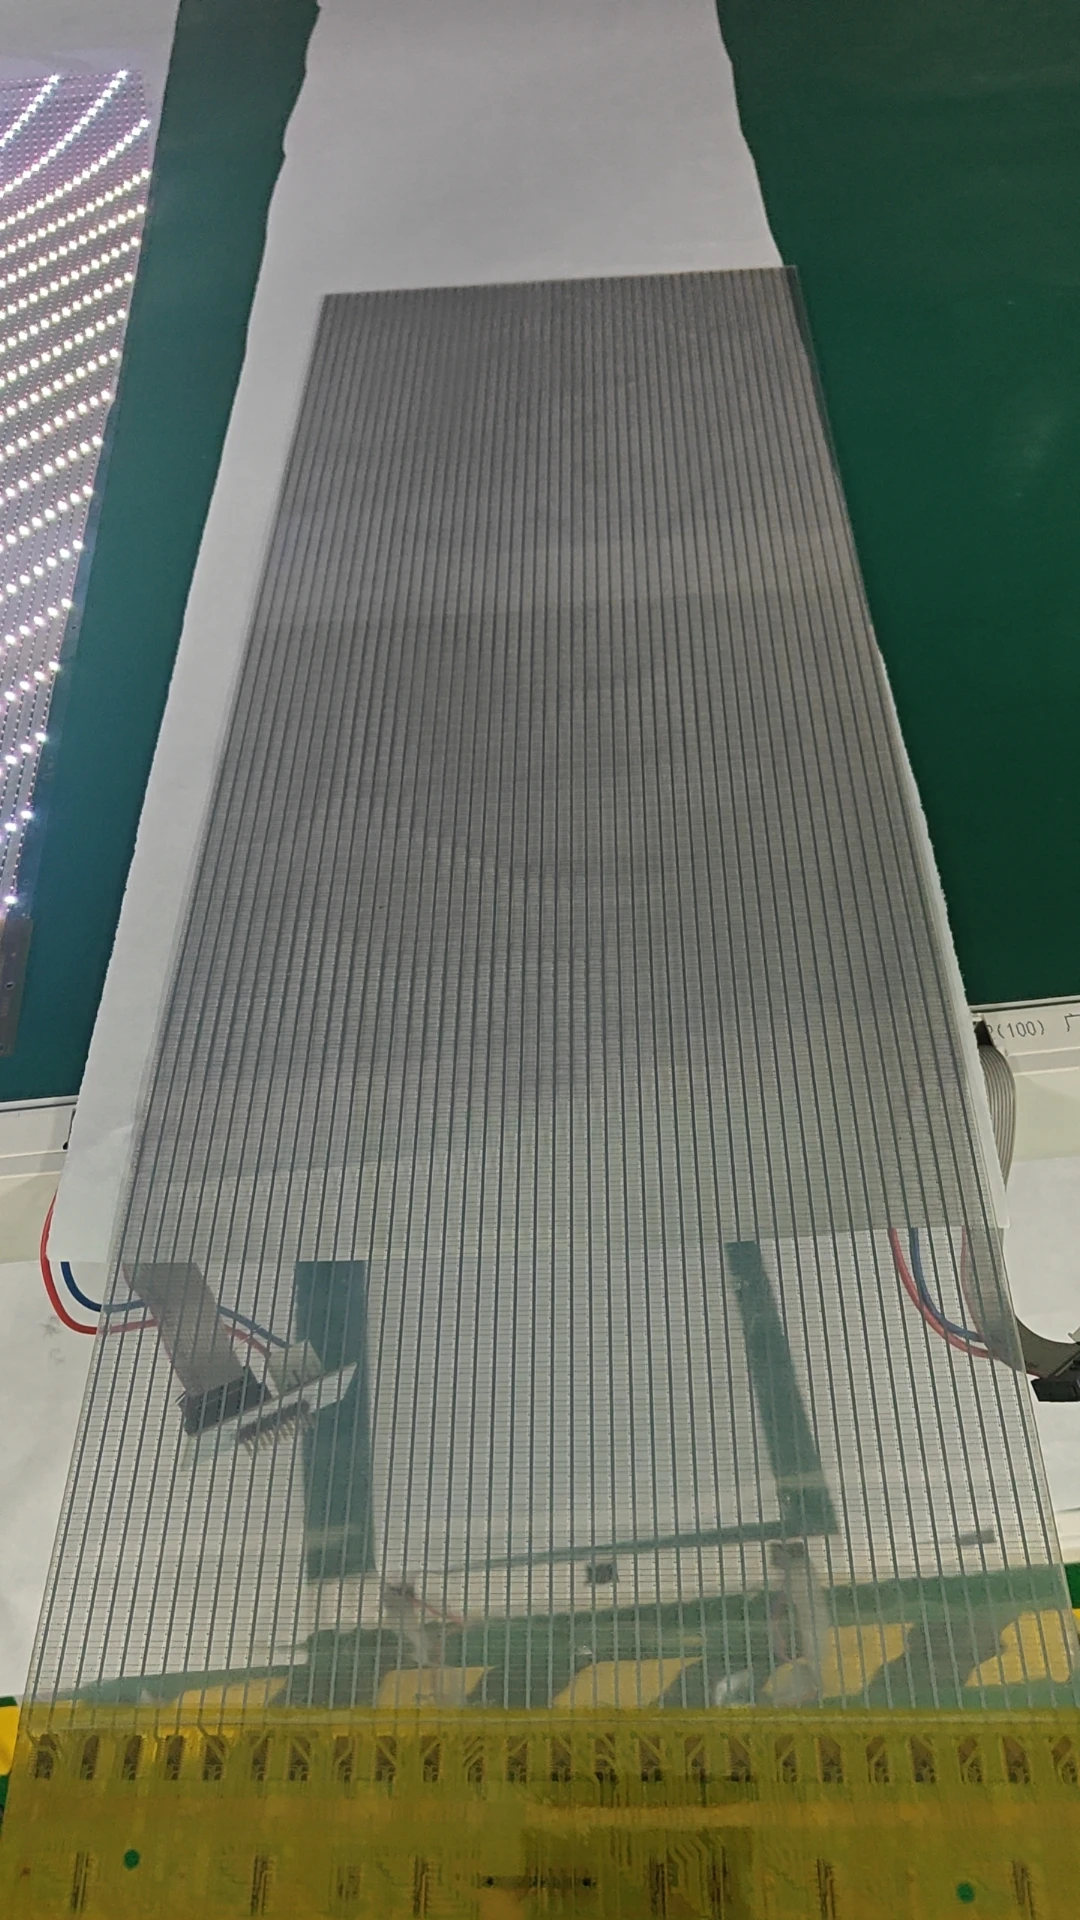 Shenzhen MDS p5 flexible led display screen panel 640mm * 240mm 90% transparency 3840hz refresh rate